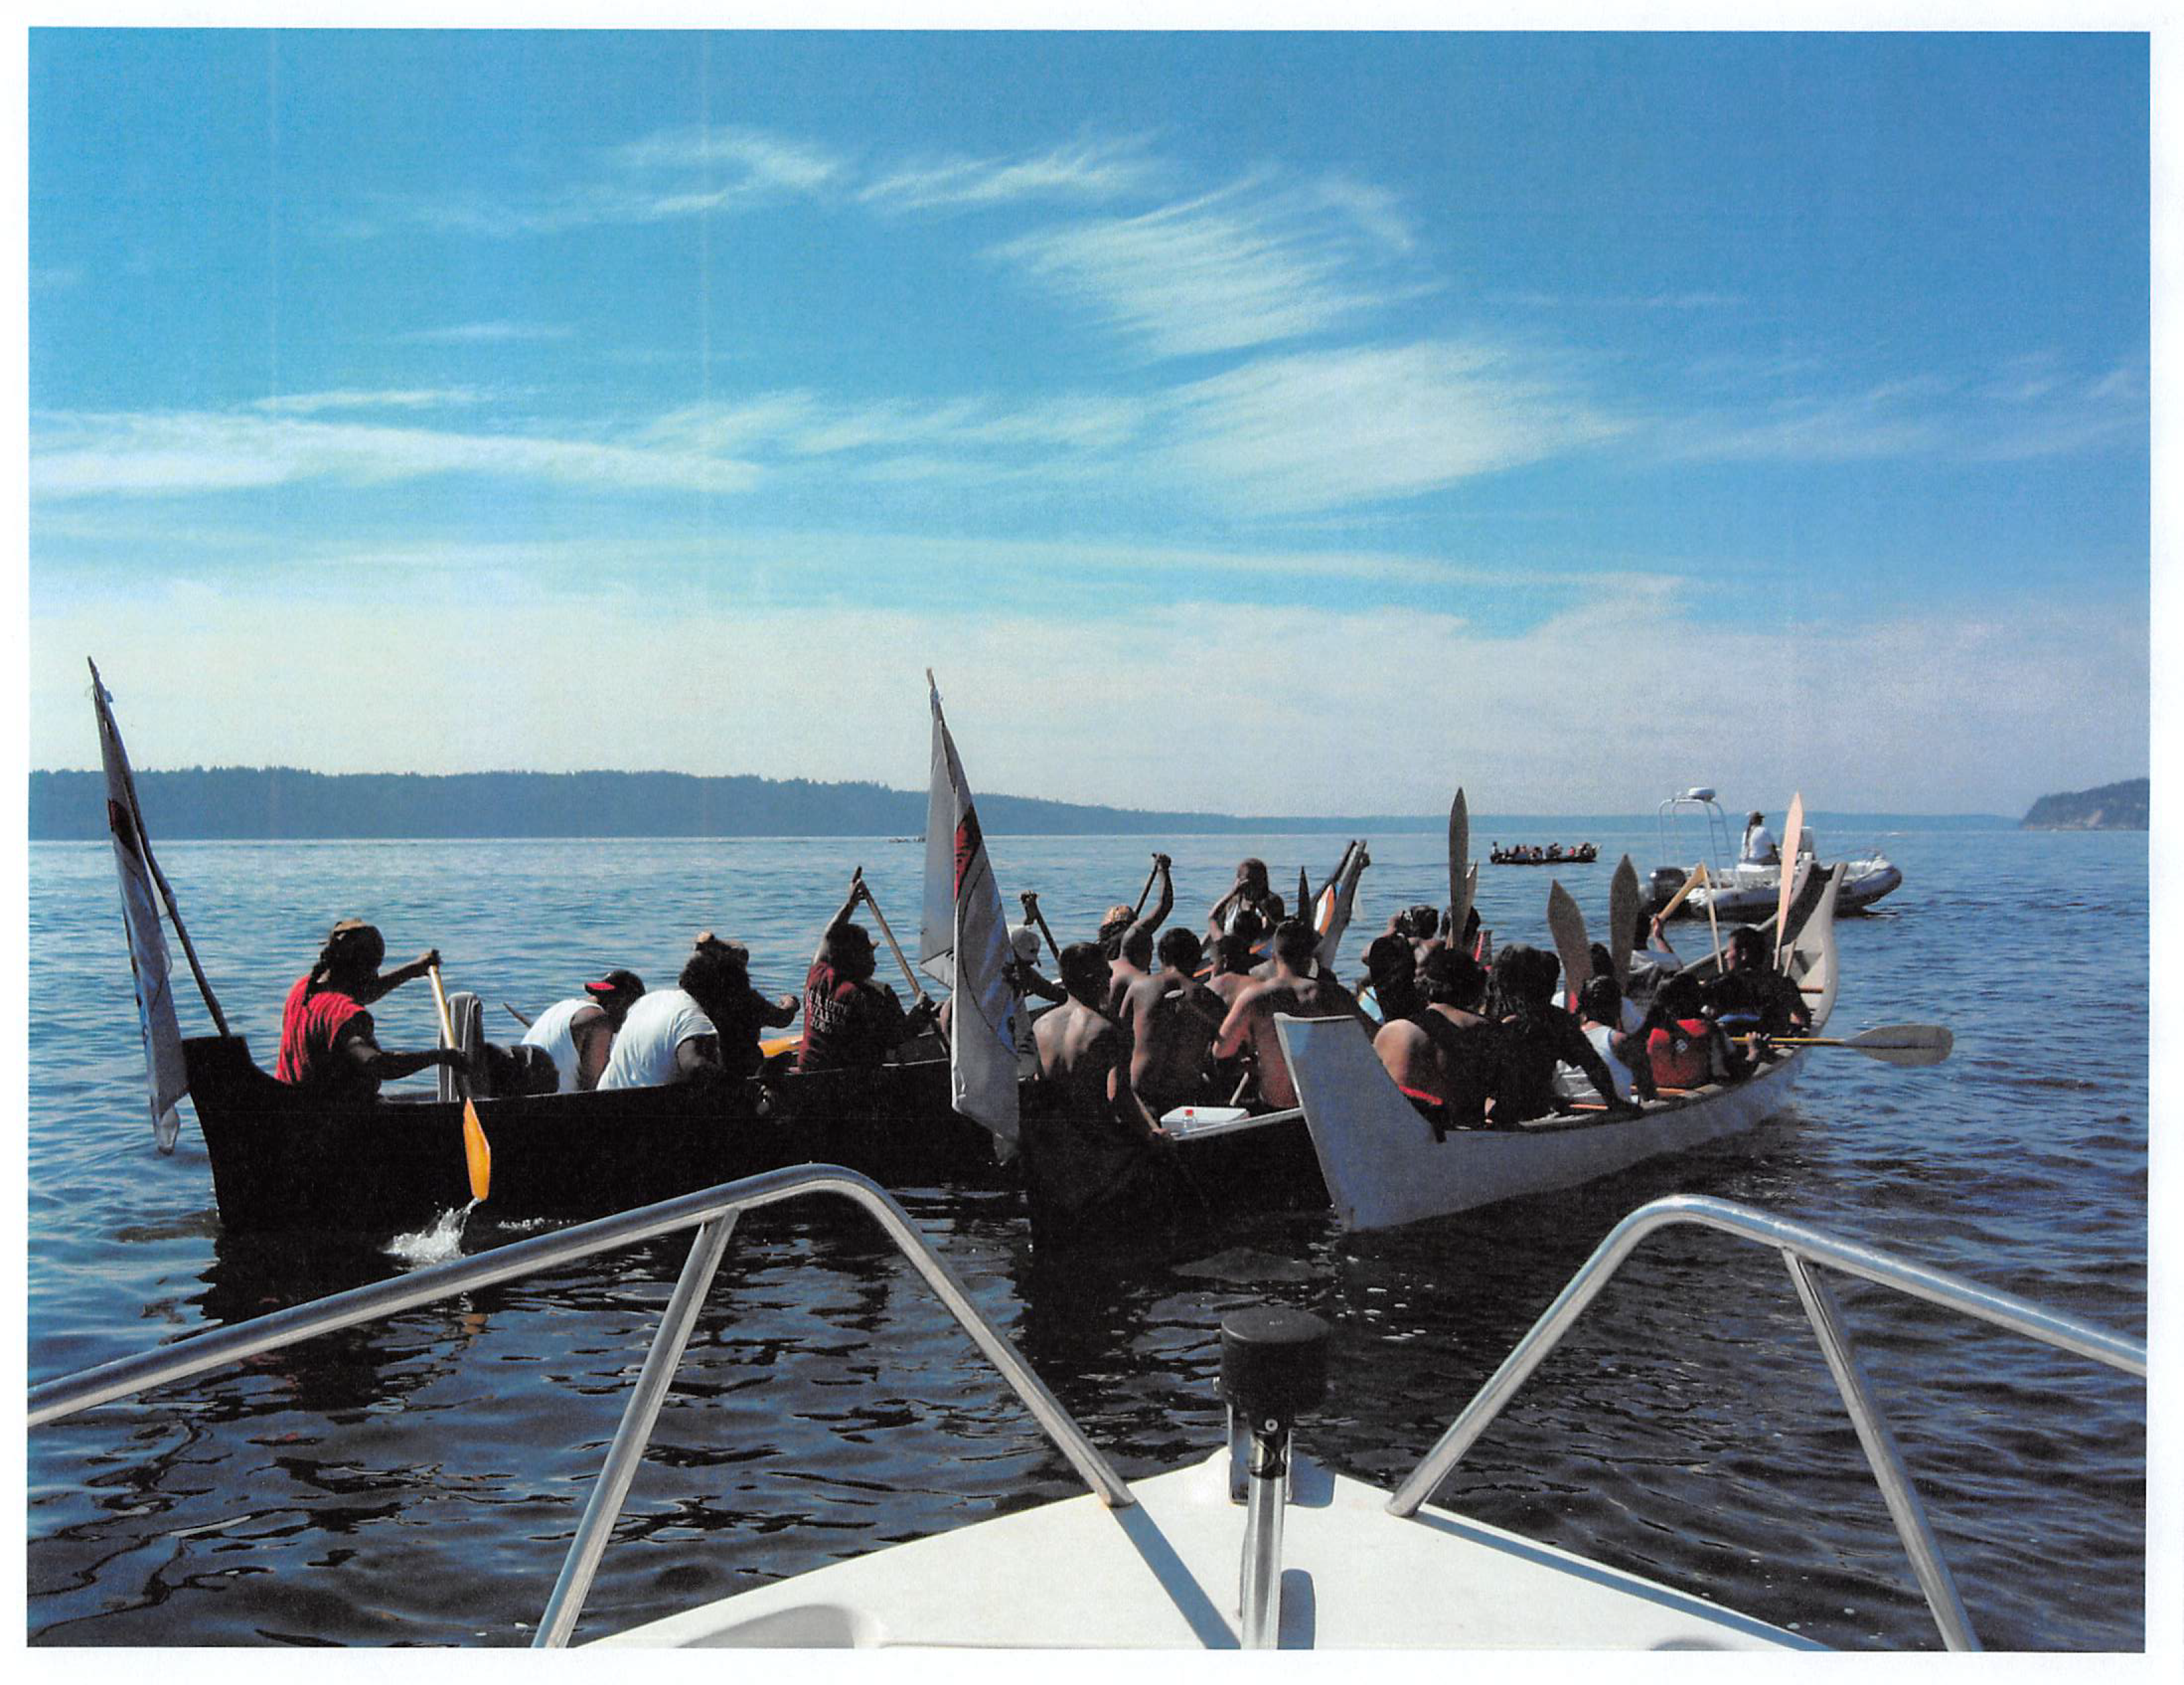 About 30 members of the Quileute tribe are seated in 2-3 canoes, setting off on a journey on blue waters and beneath a blue sky.